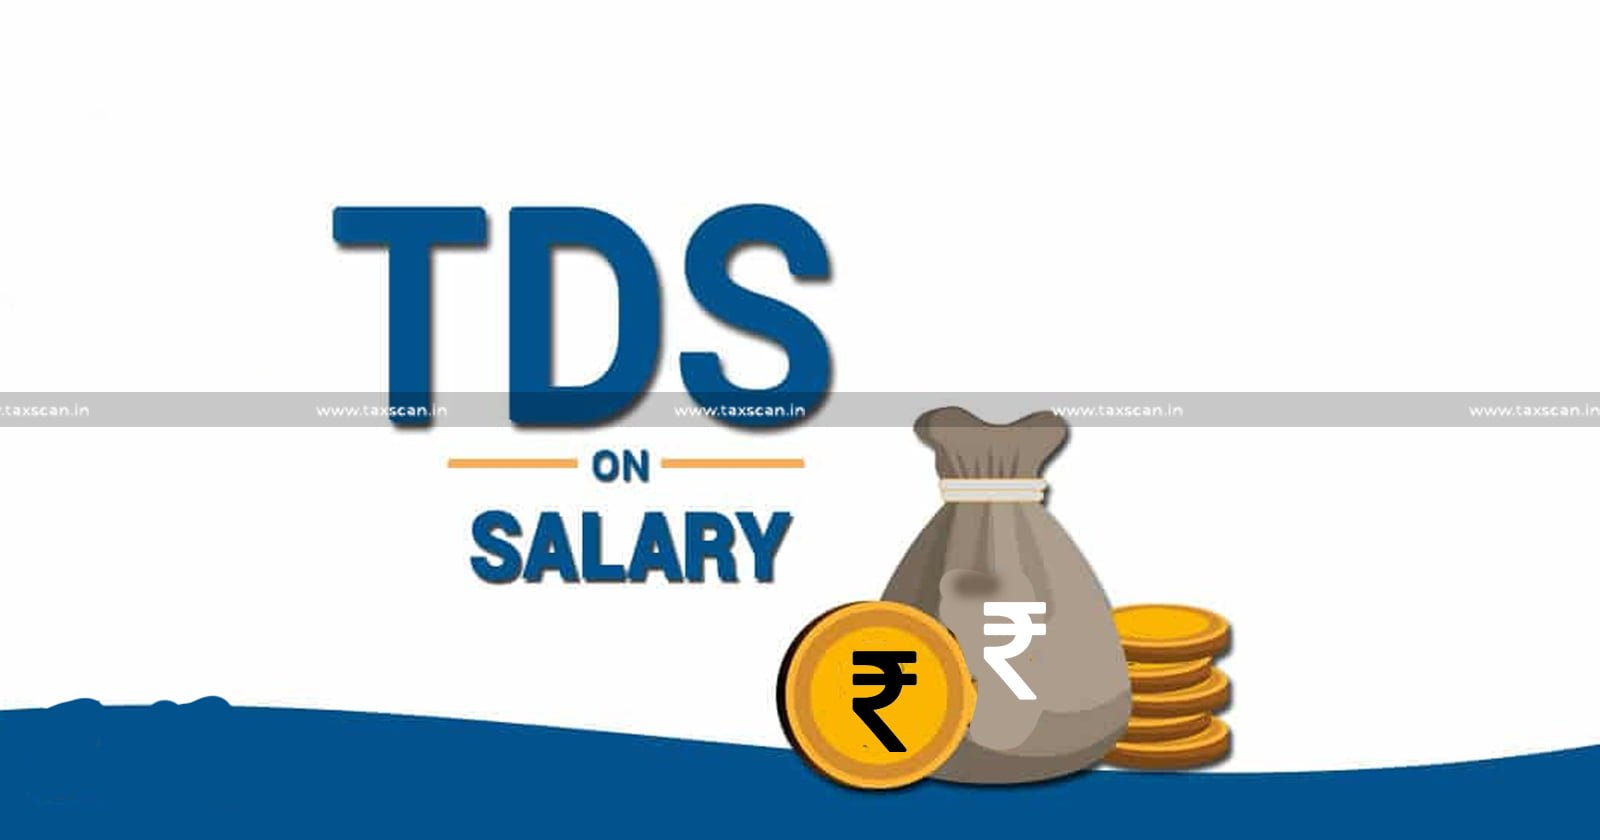 How is TDS calculated on employees’ salaries?